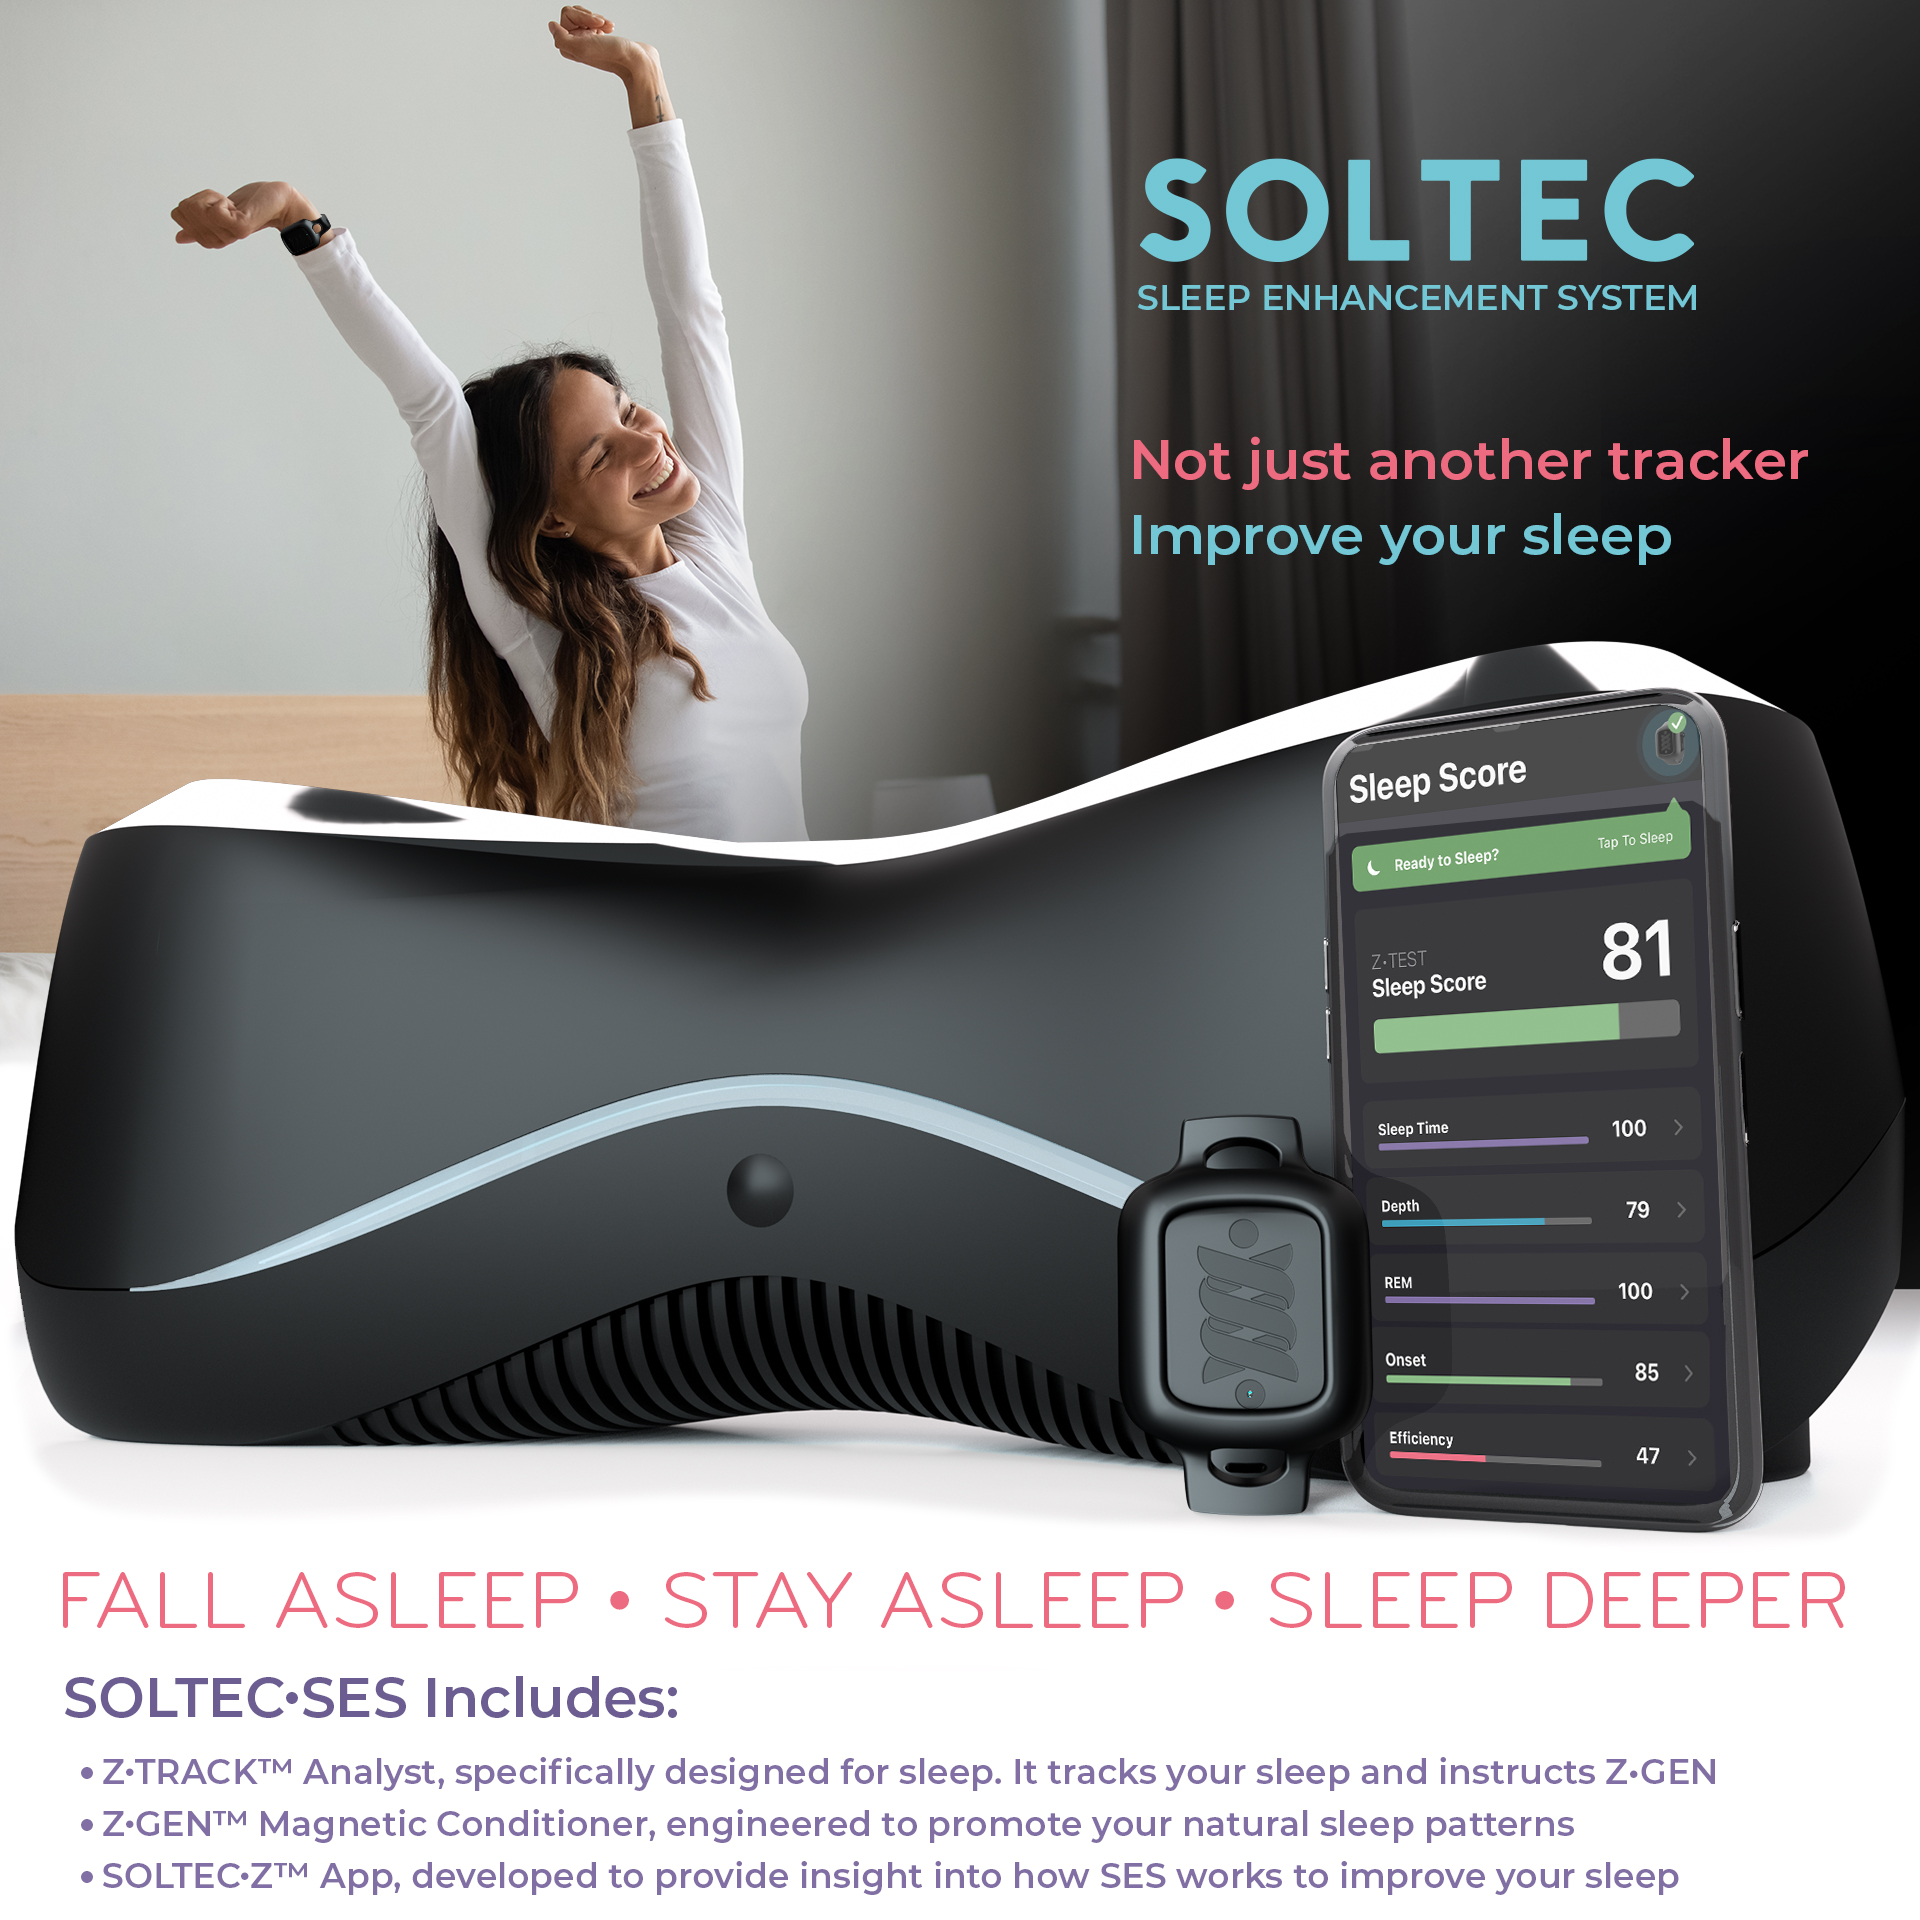 SOLTEC SES image explains that SES is not just a tracker but includes Z TRACK and Z GEN to provide sleep therapy